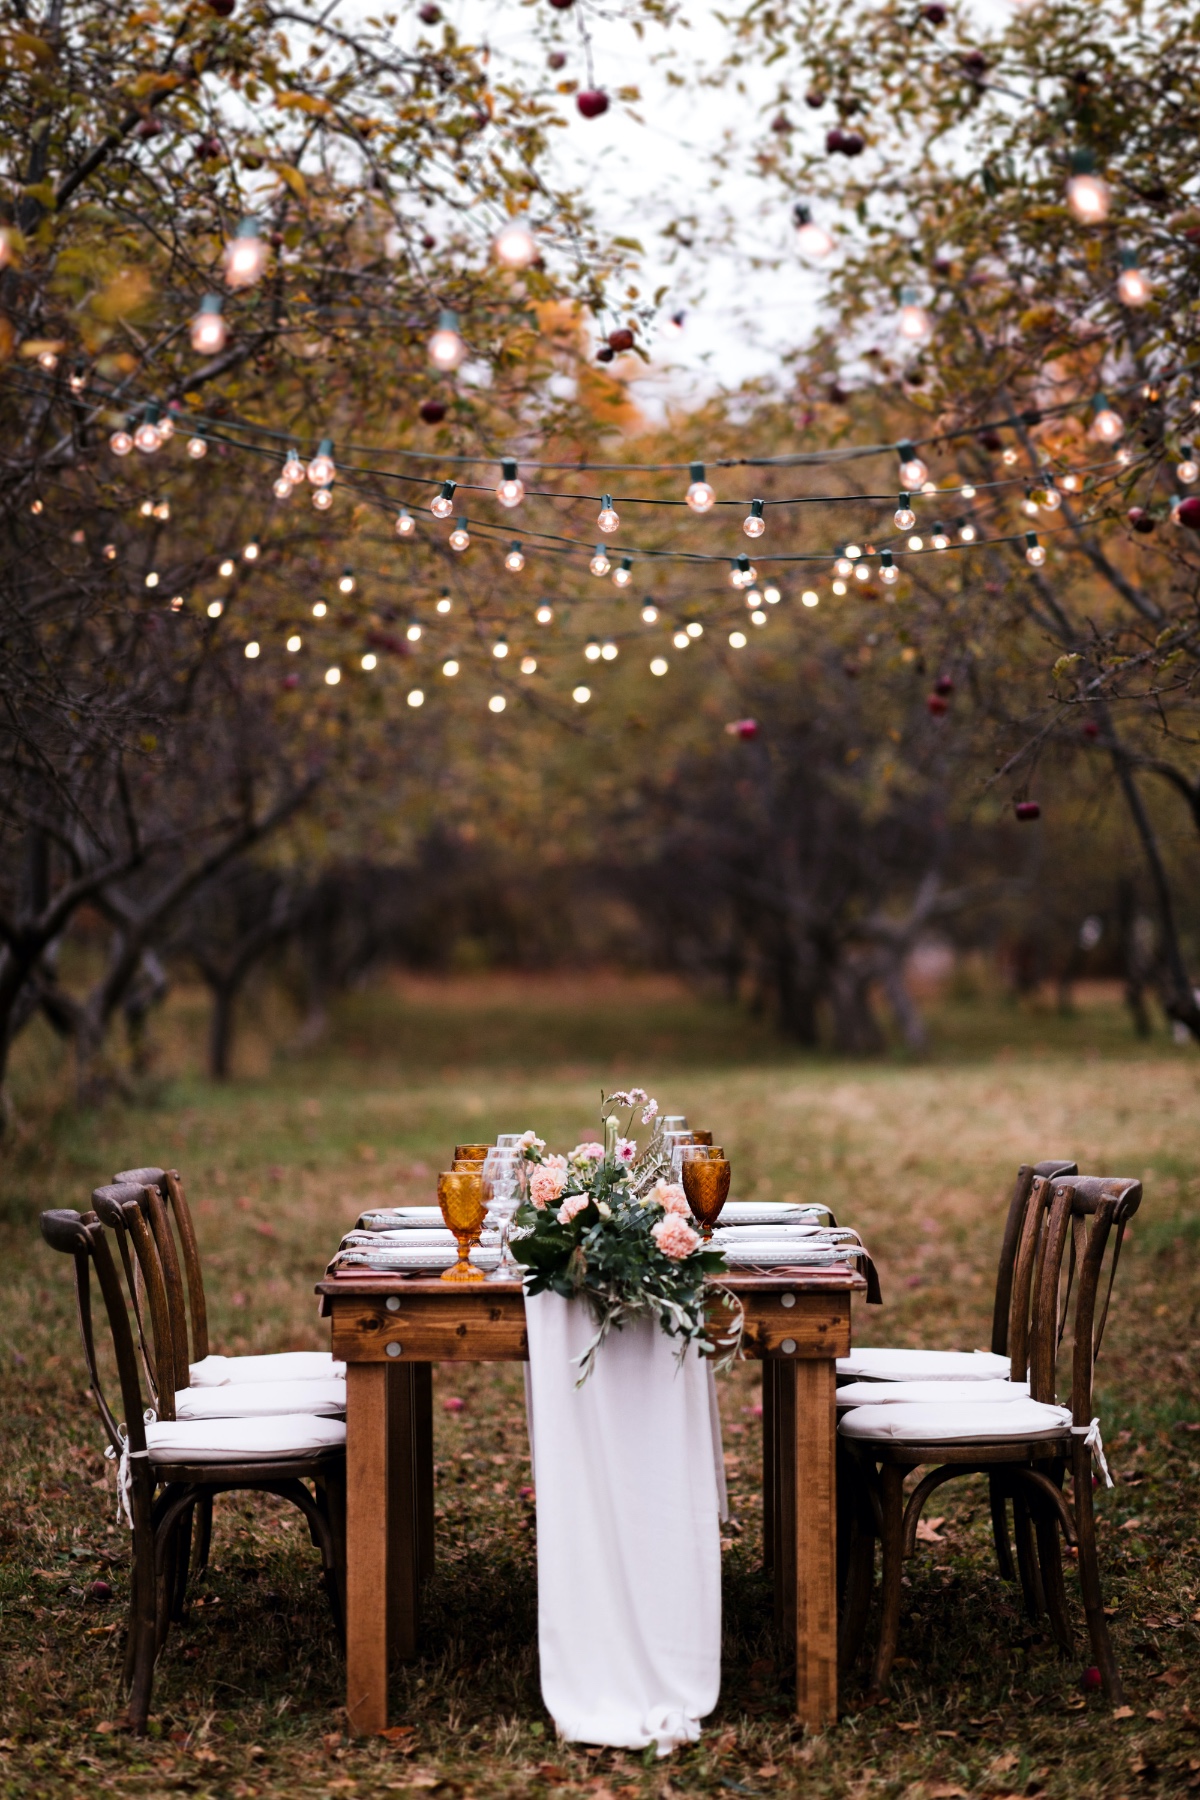 Outdoor dining in apple orchard under twinkle lights